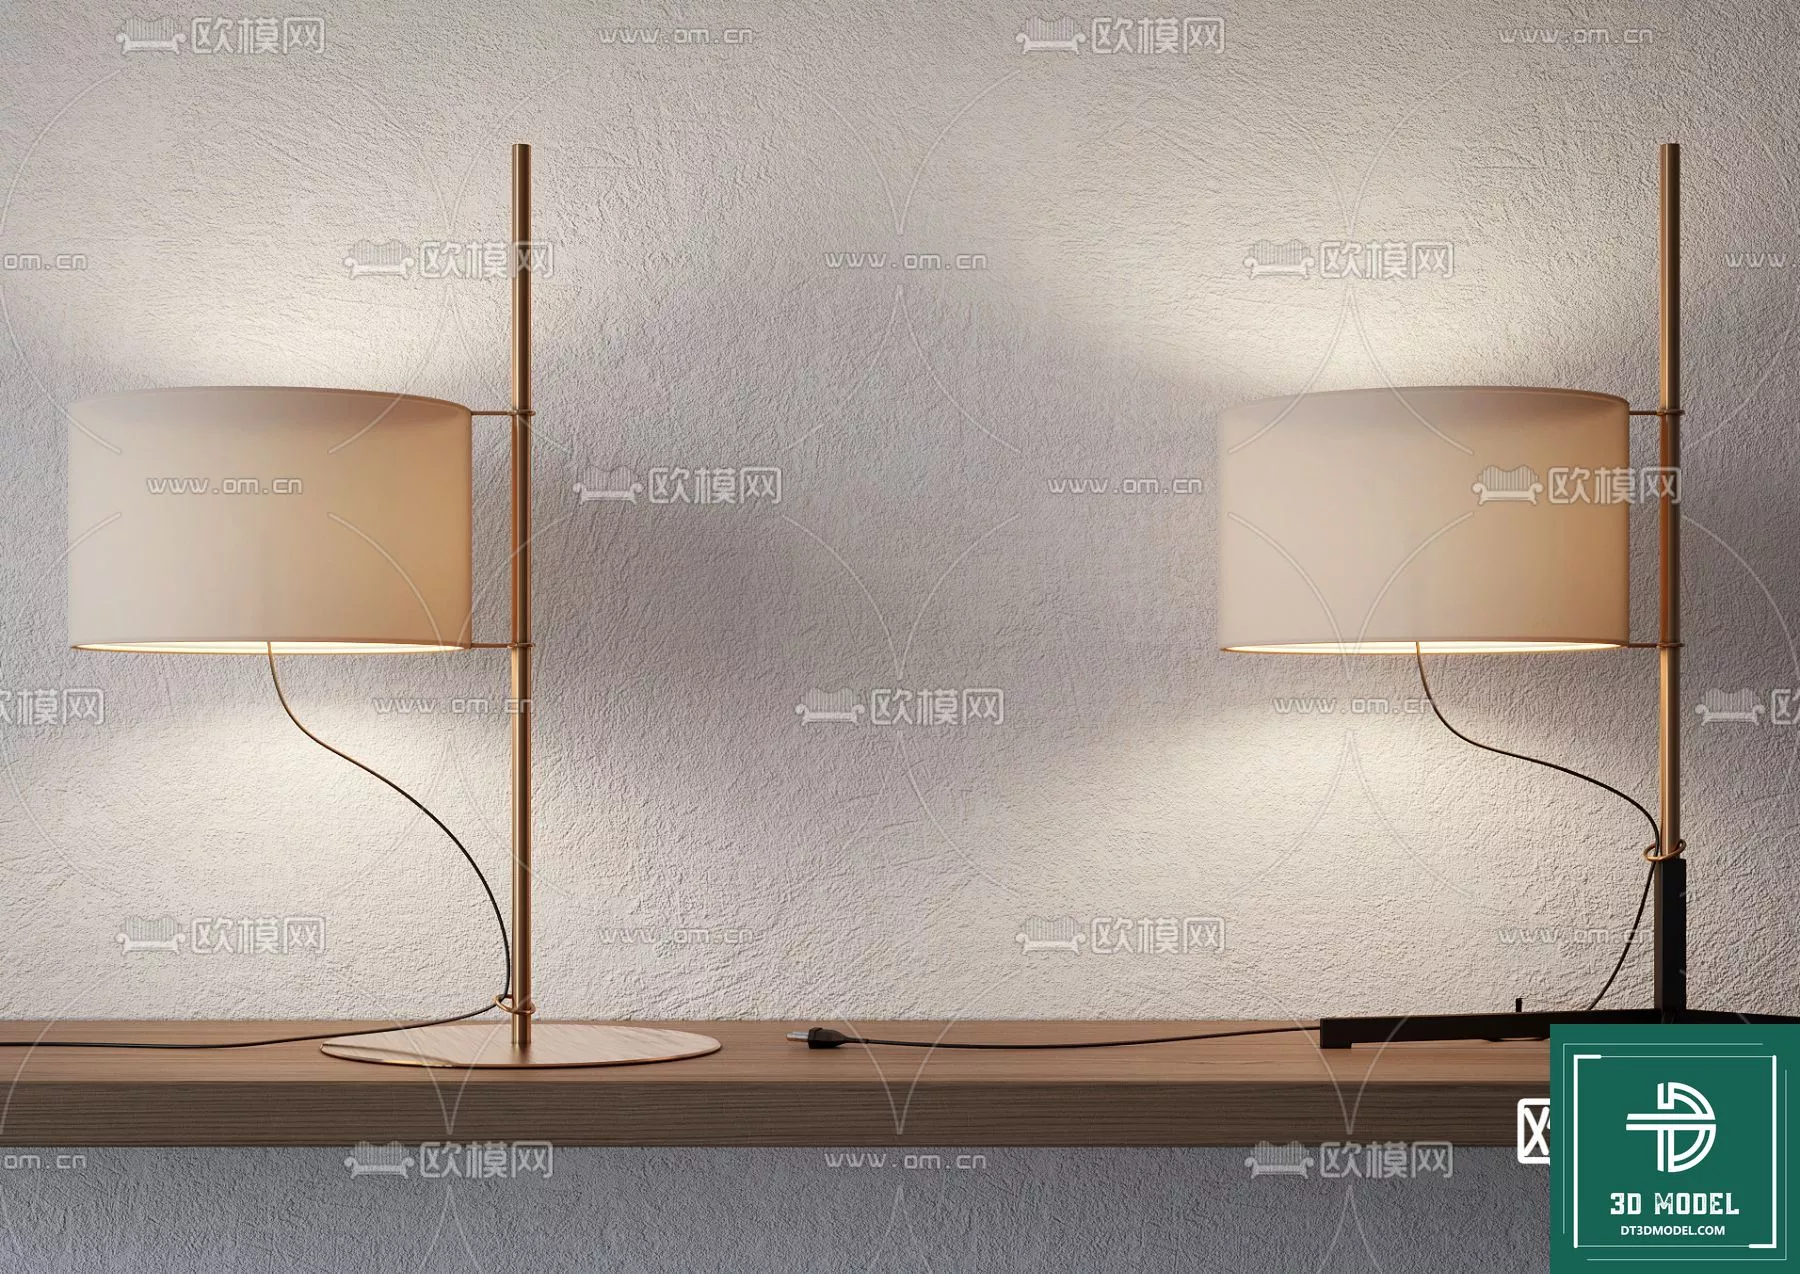 MODERN TABLE LAMP - SKETCHUP 3D MODEL - VRAY OR ENSCAPE - ID14526